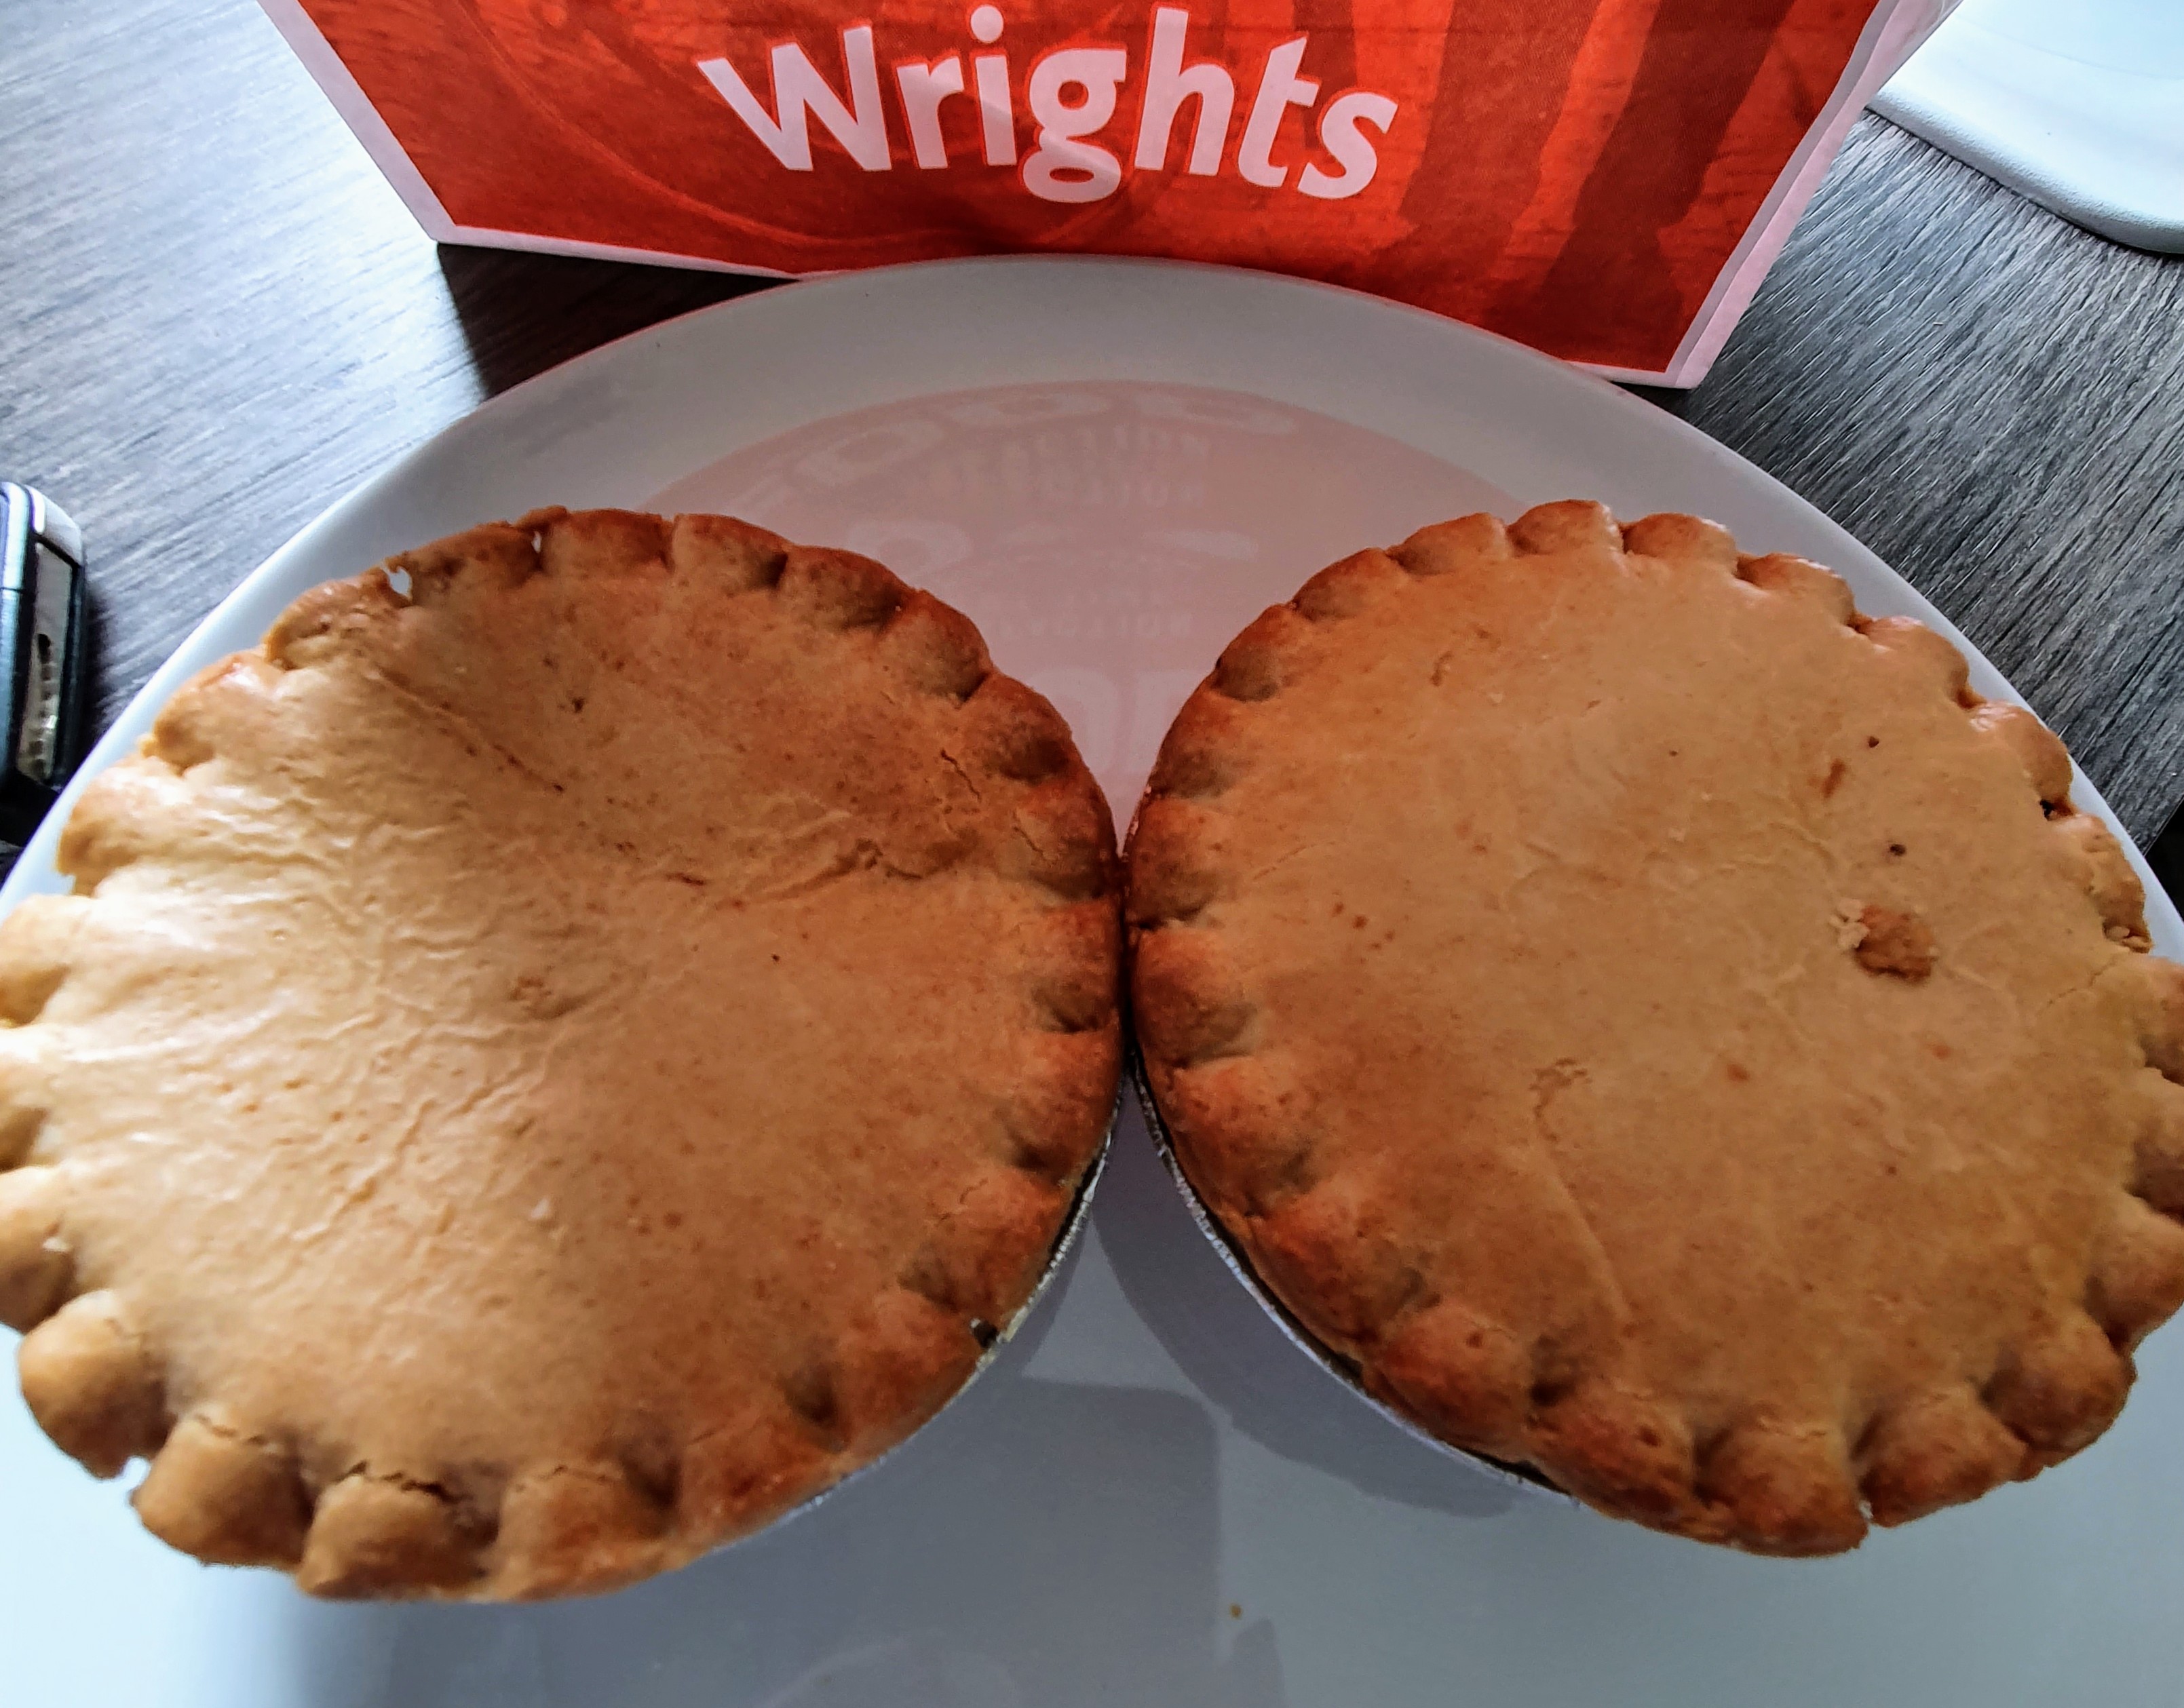 Wrights meat and potato pies